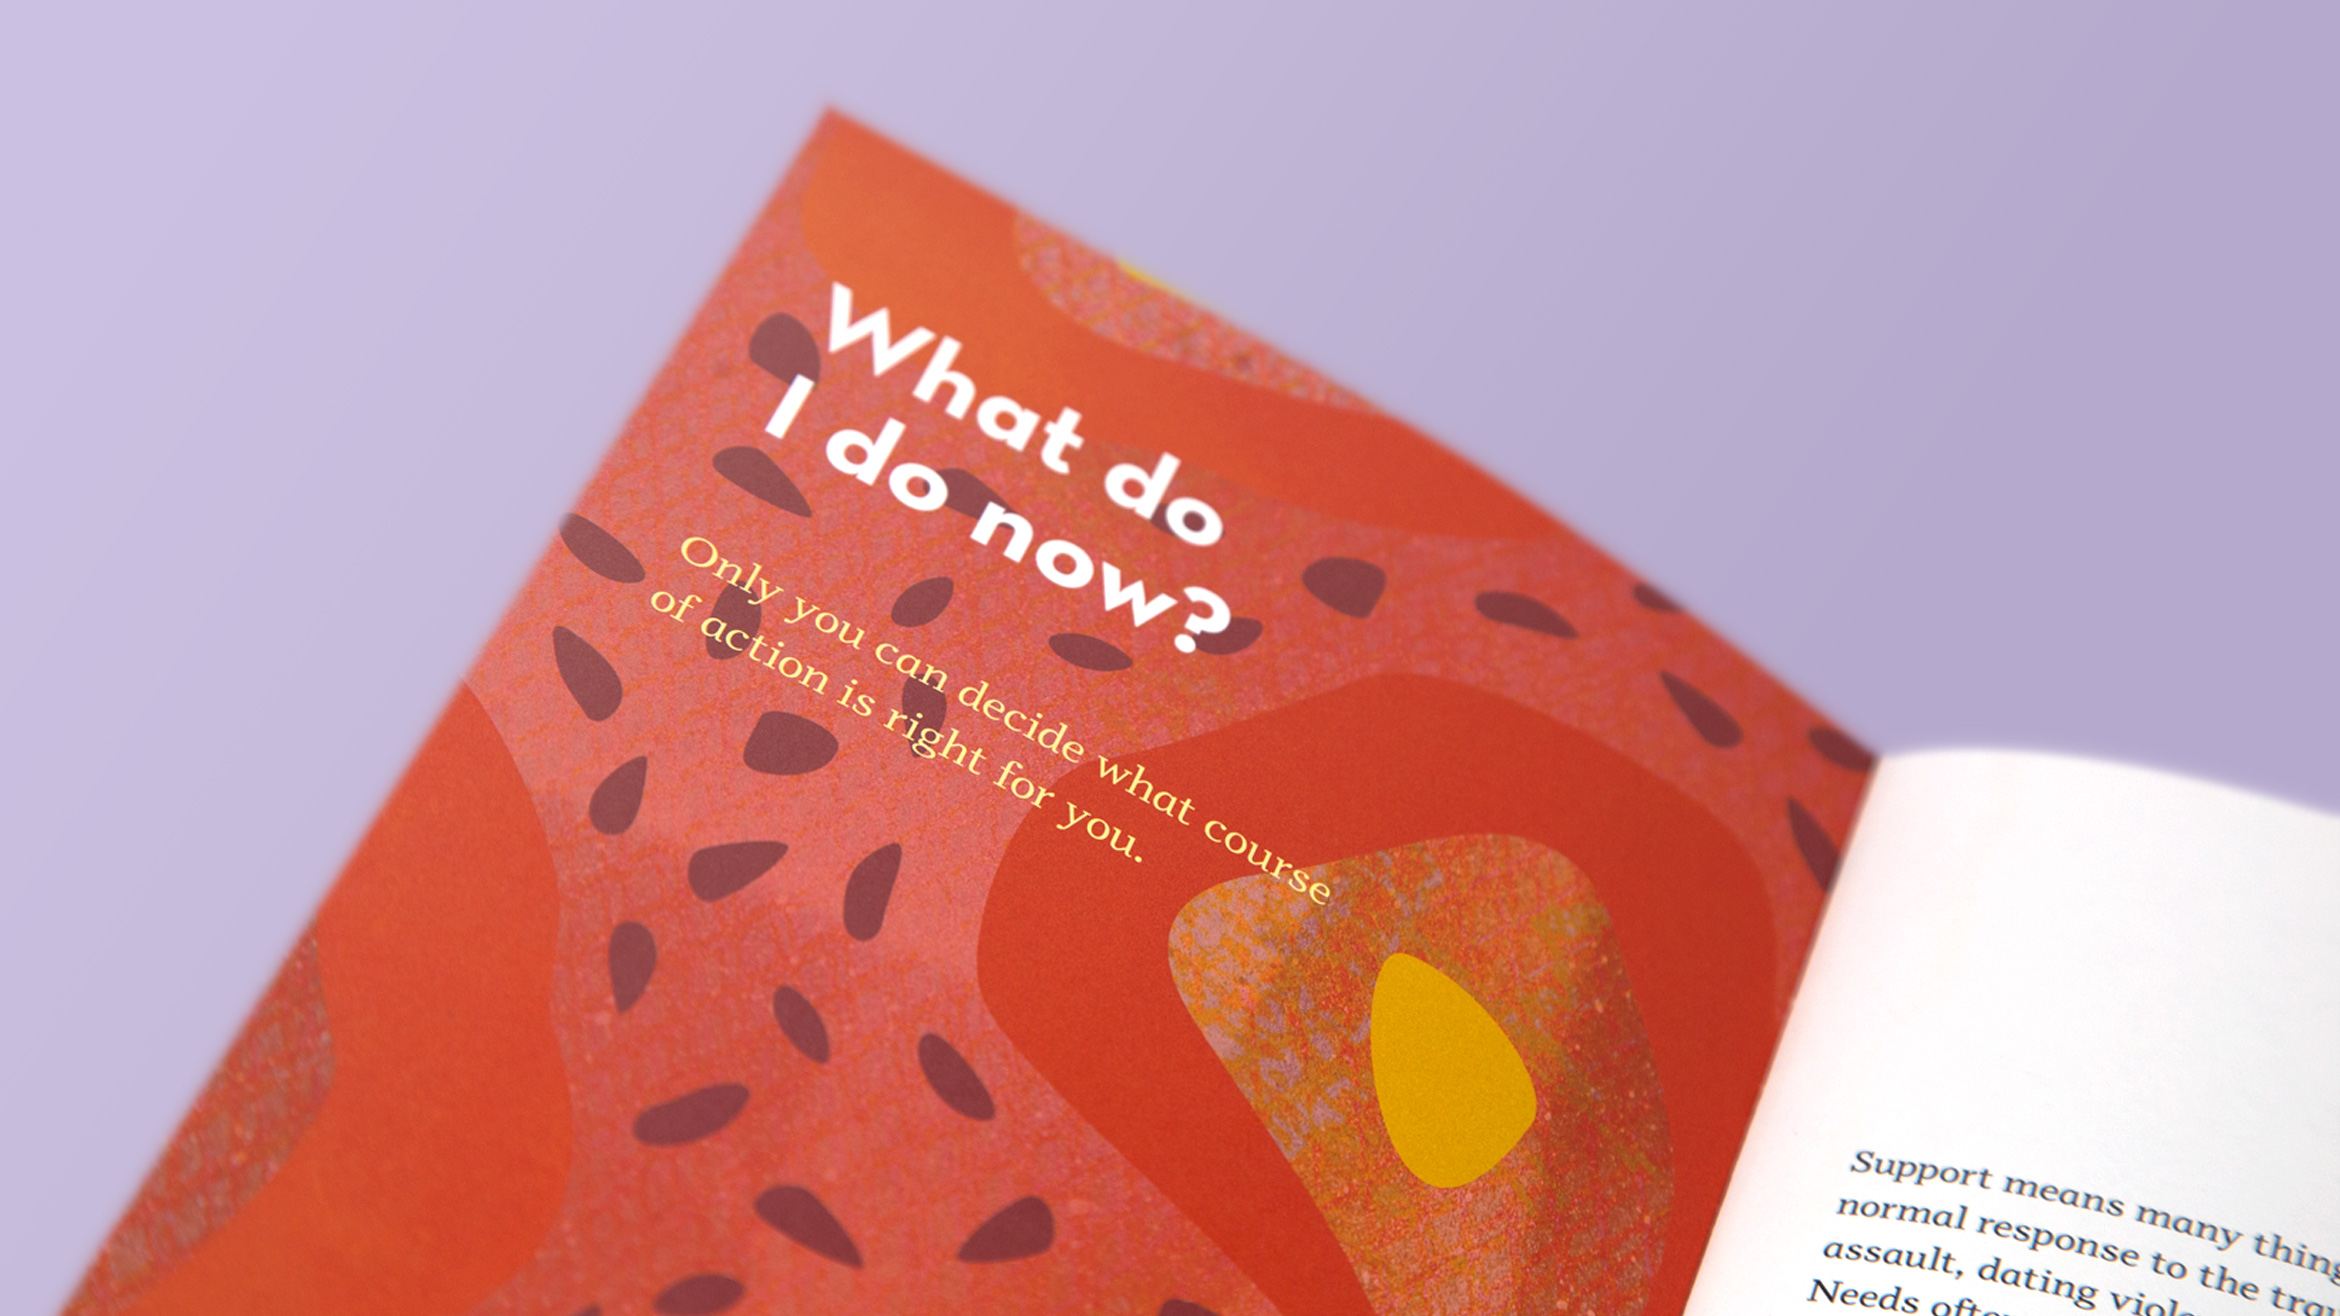 Scripps College Title IX Brochure What Do I Do Now Spread designed by Kilter